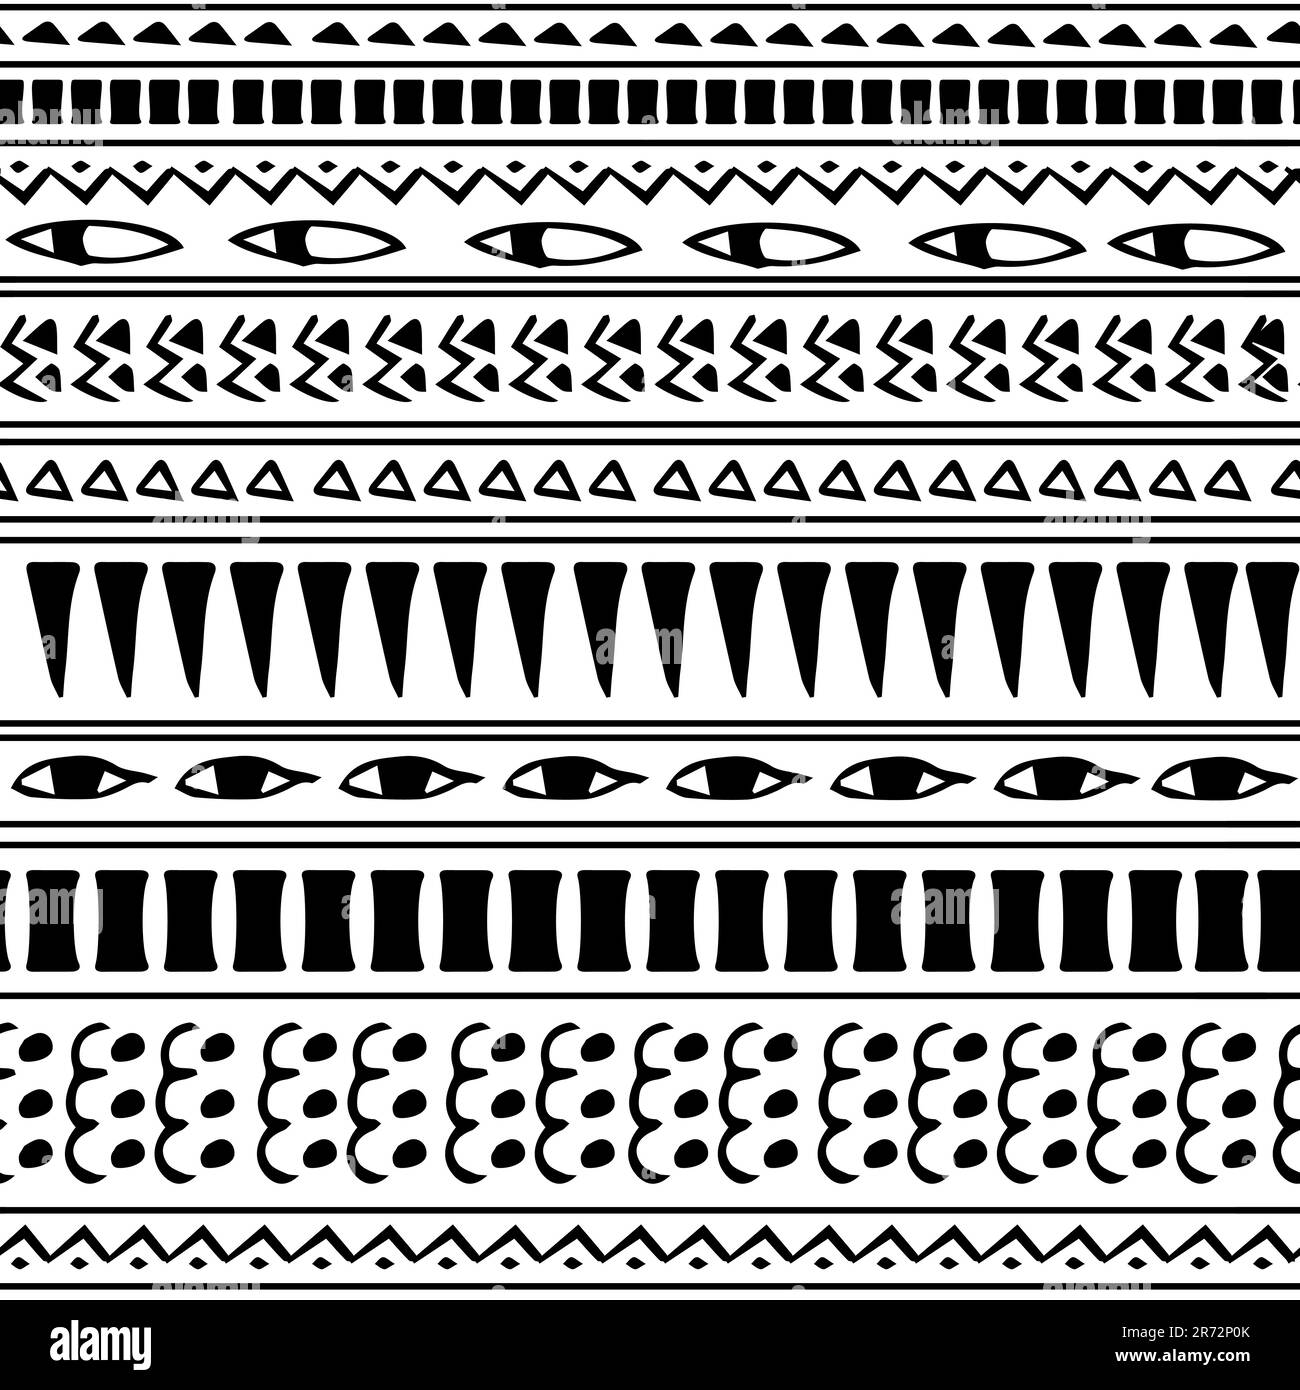 Black white hand drawn aztec ethnic seamless border pattern color Egyptian hieroglyphs isolated on white background Stock Vector